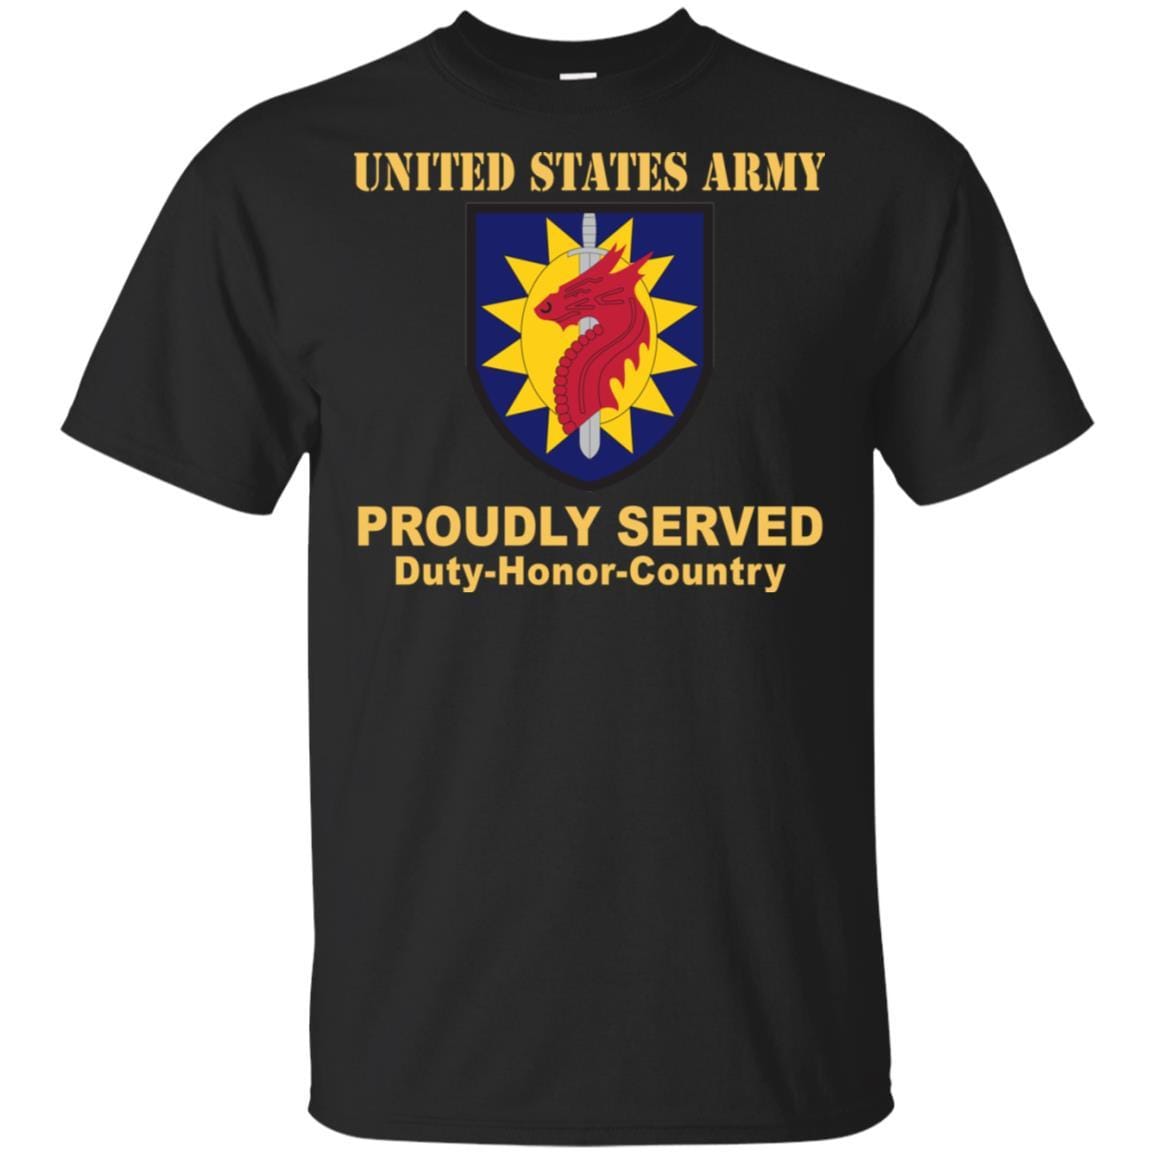 US ARMY 224 SUSTAINMENT BRIGADE- Proudly Served T-Shirt On Front For Men-TShirt-Army-Veterans Nation